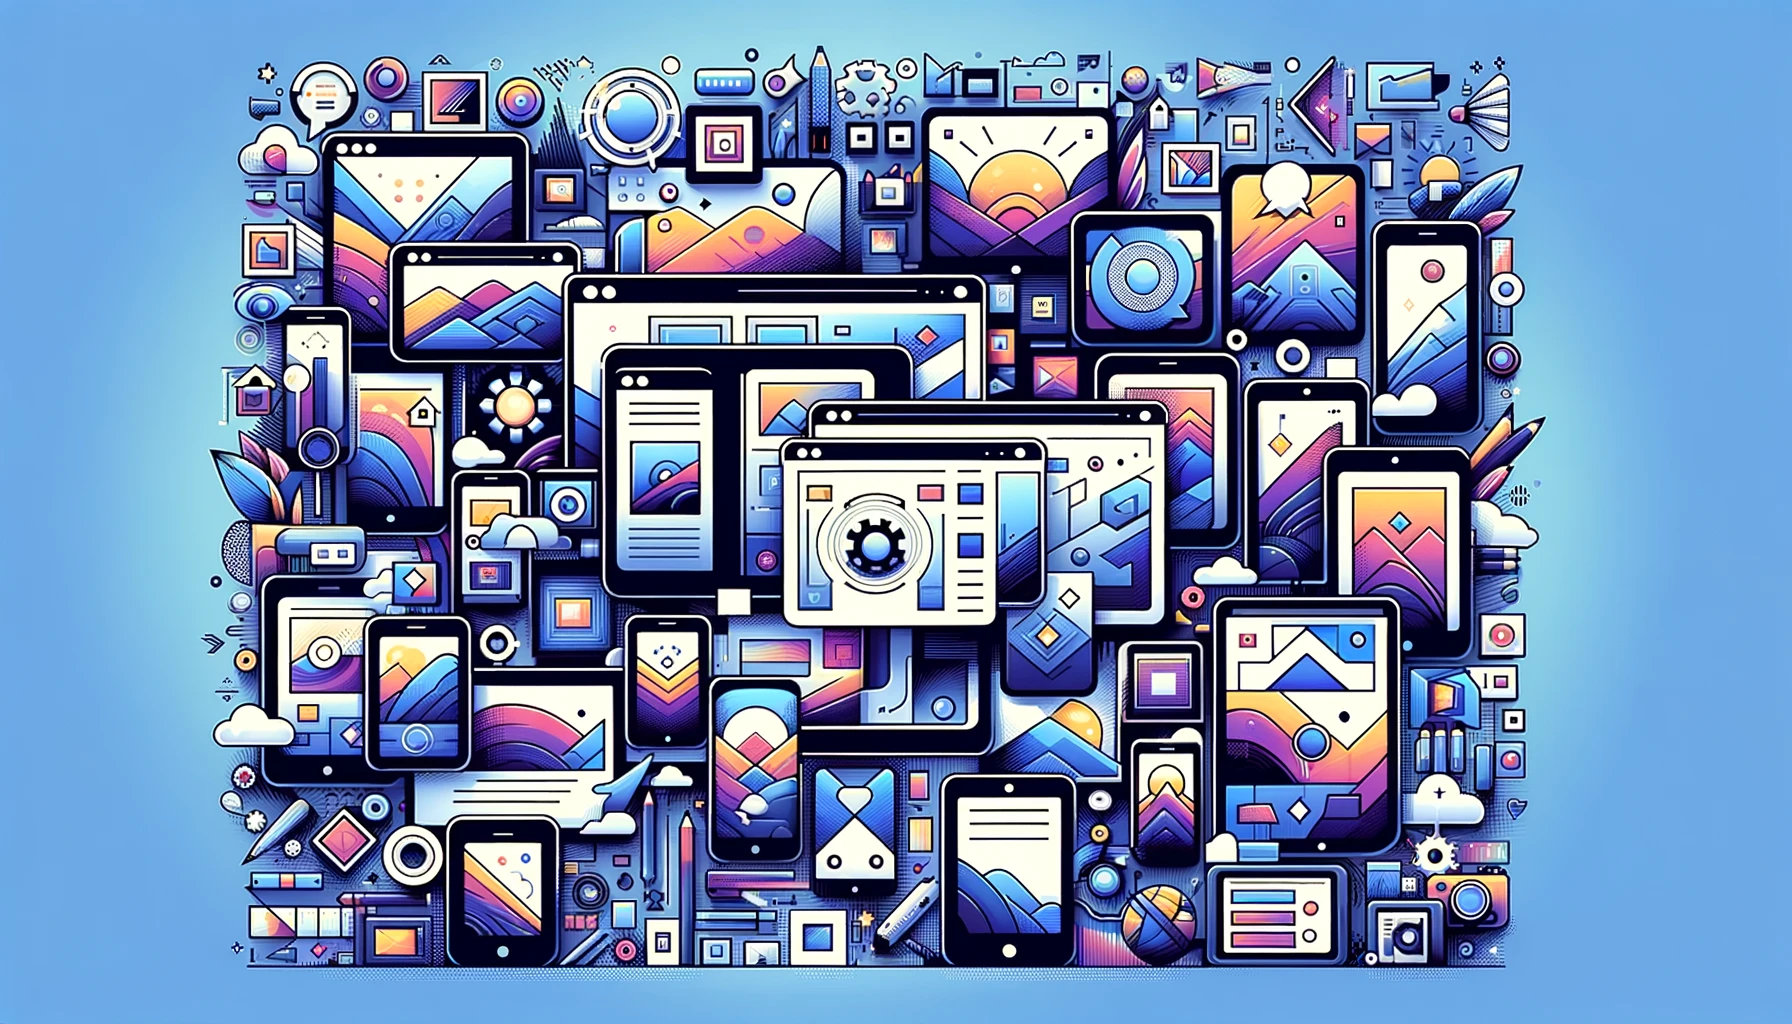 Illustrative-Collage-Various-Devices-Showcasing-Responsive-Viewport-Design-Abstract-Imagery-Interconnected-Technology-Elements-Vibrant-Colors